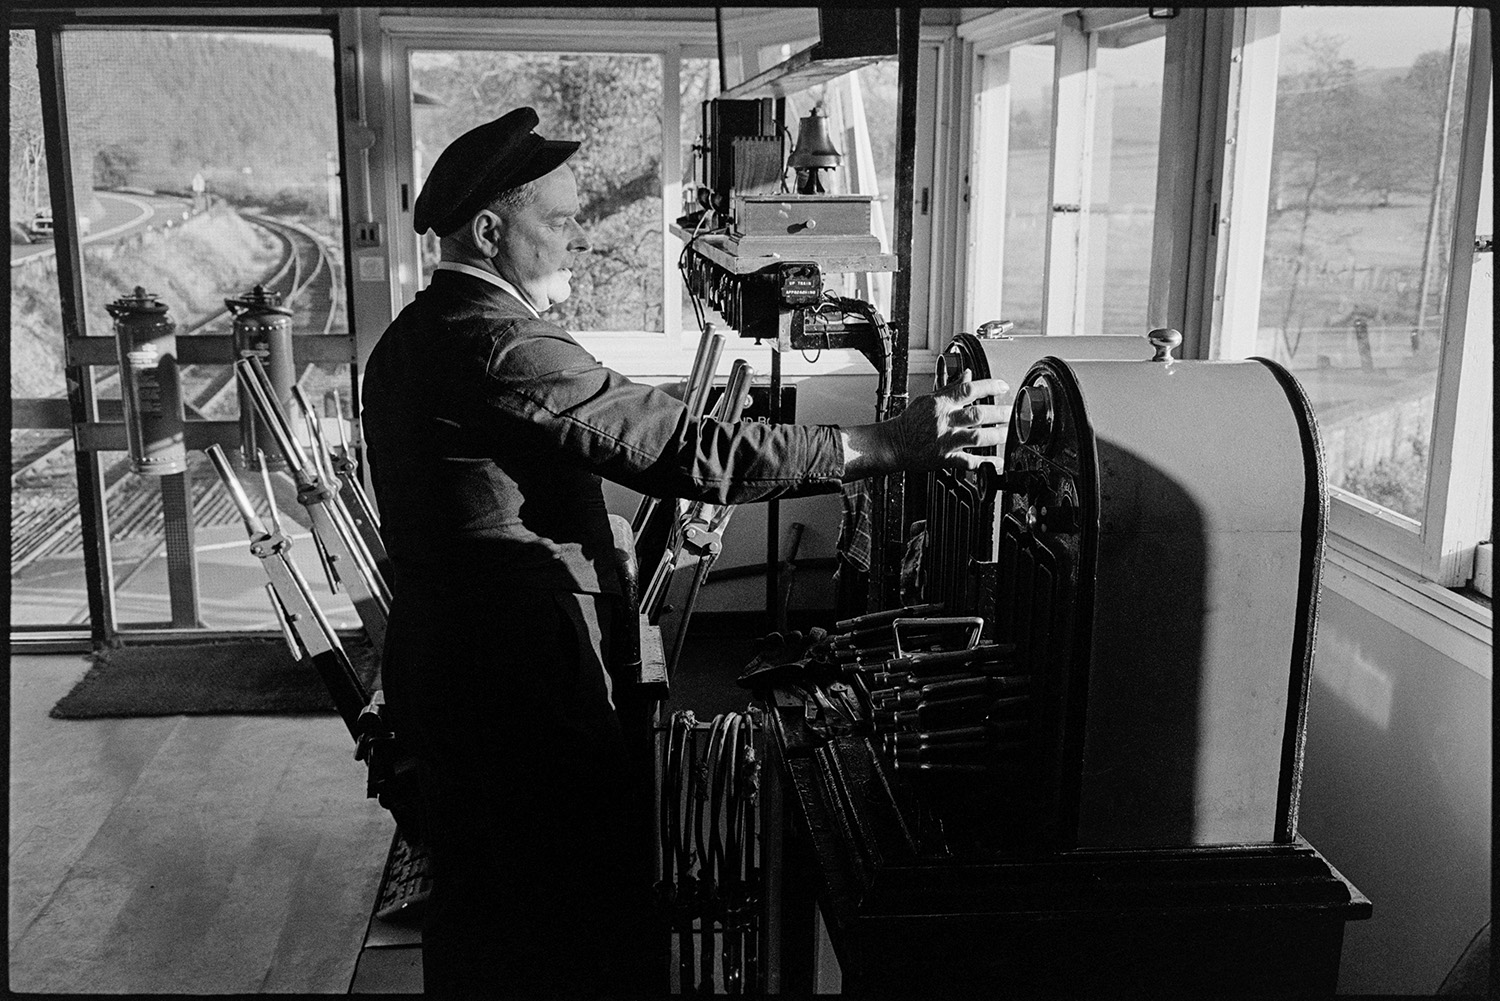 Signal box, signalman operating equipment and handing baton to train driver. 
[Jimmy Hughes, signalman, operating equipment in the signal box at Eggesford Station. The railway tracks can be seen outside the signal box.]